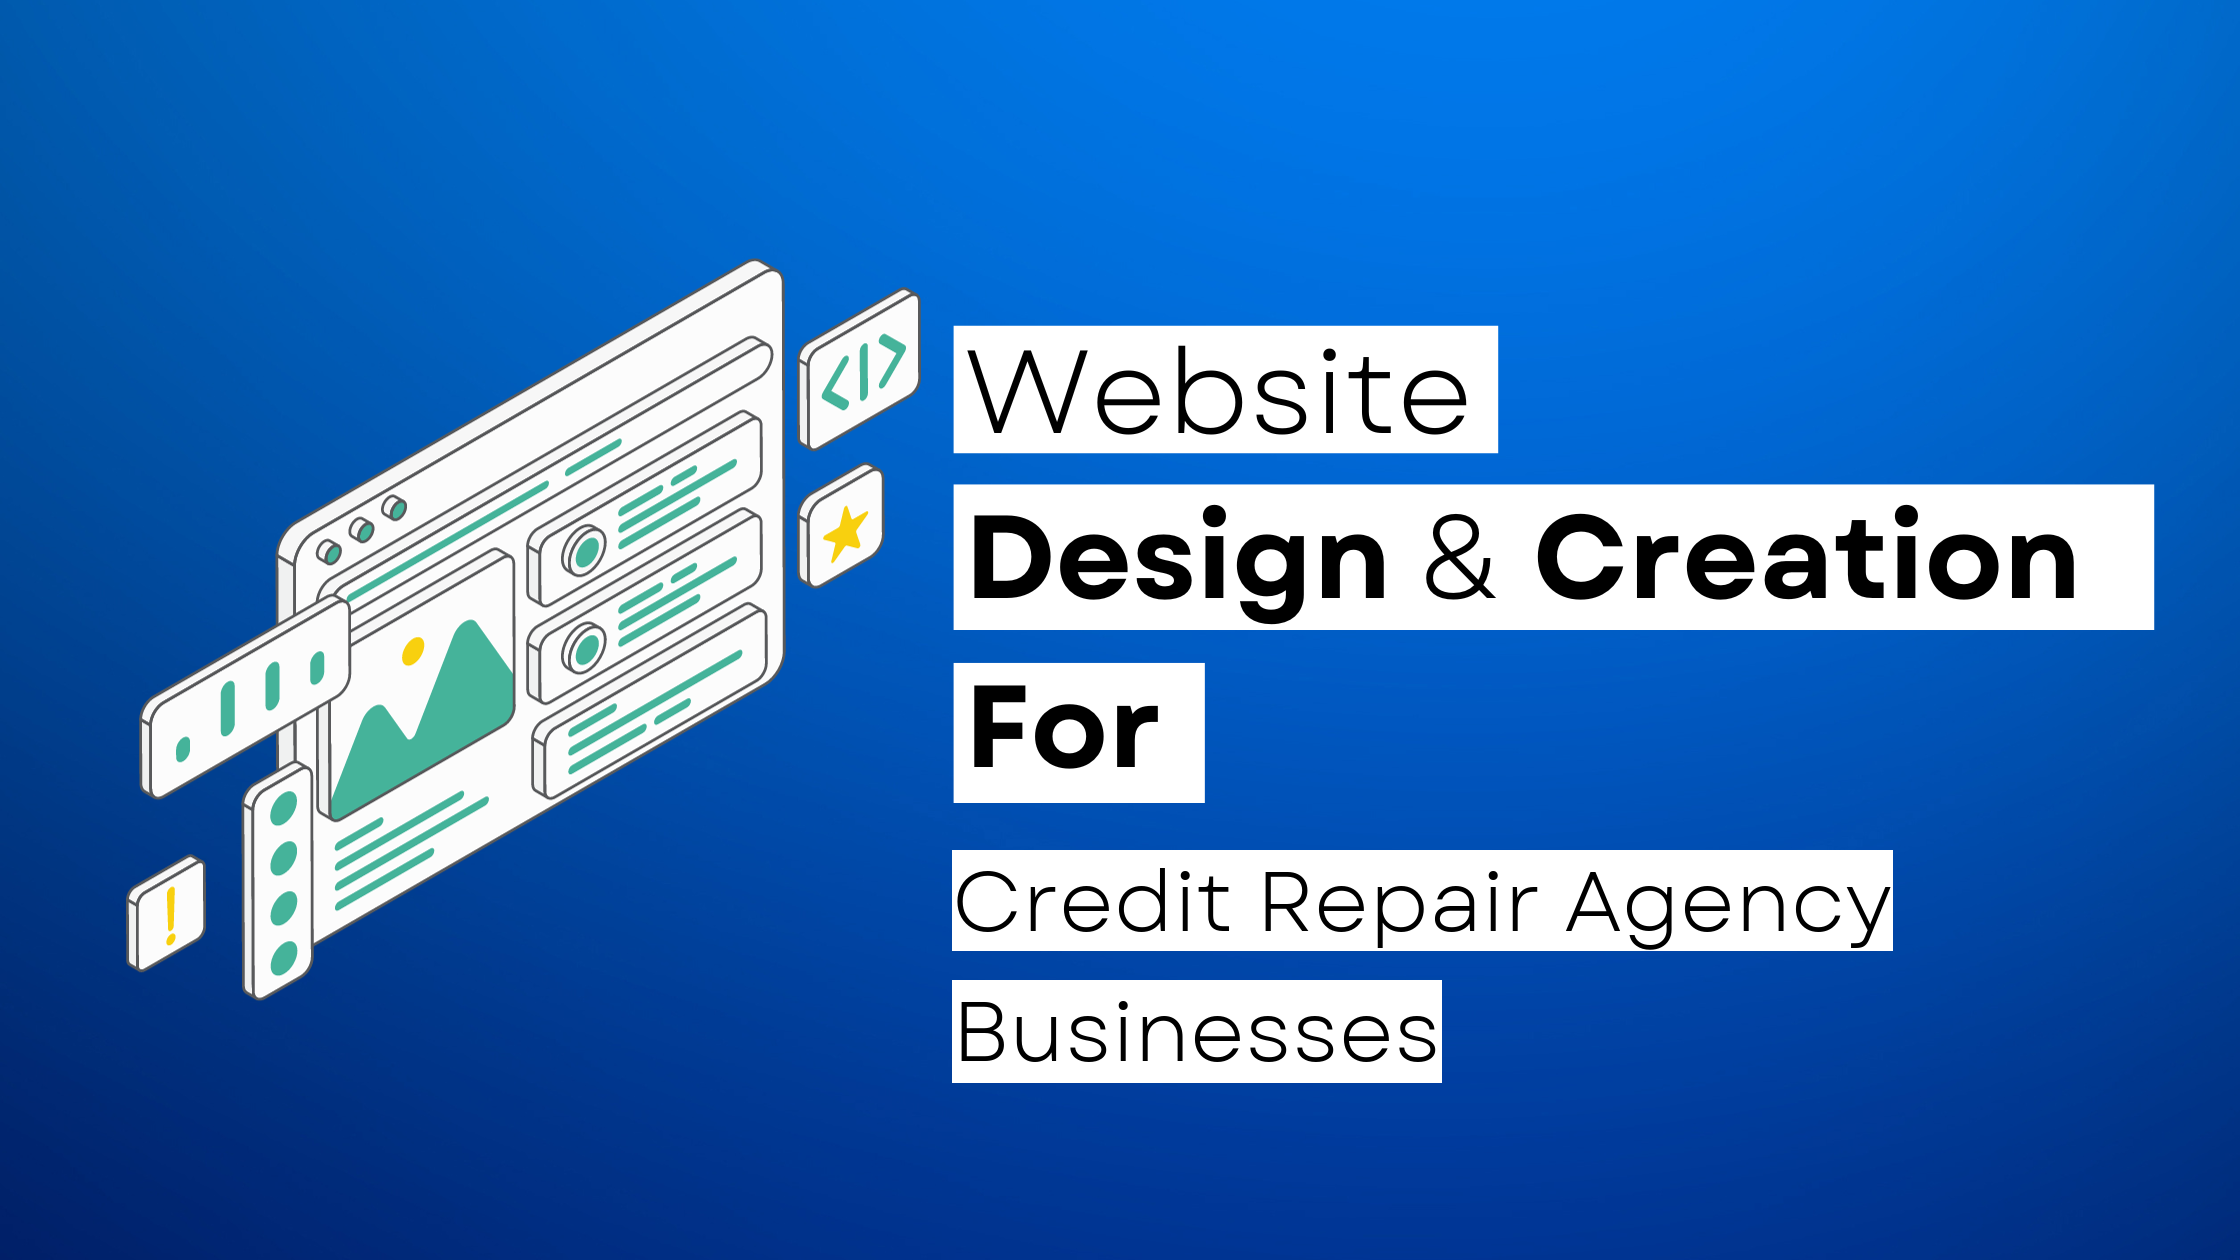 How to start a Credit Repair Agency website